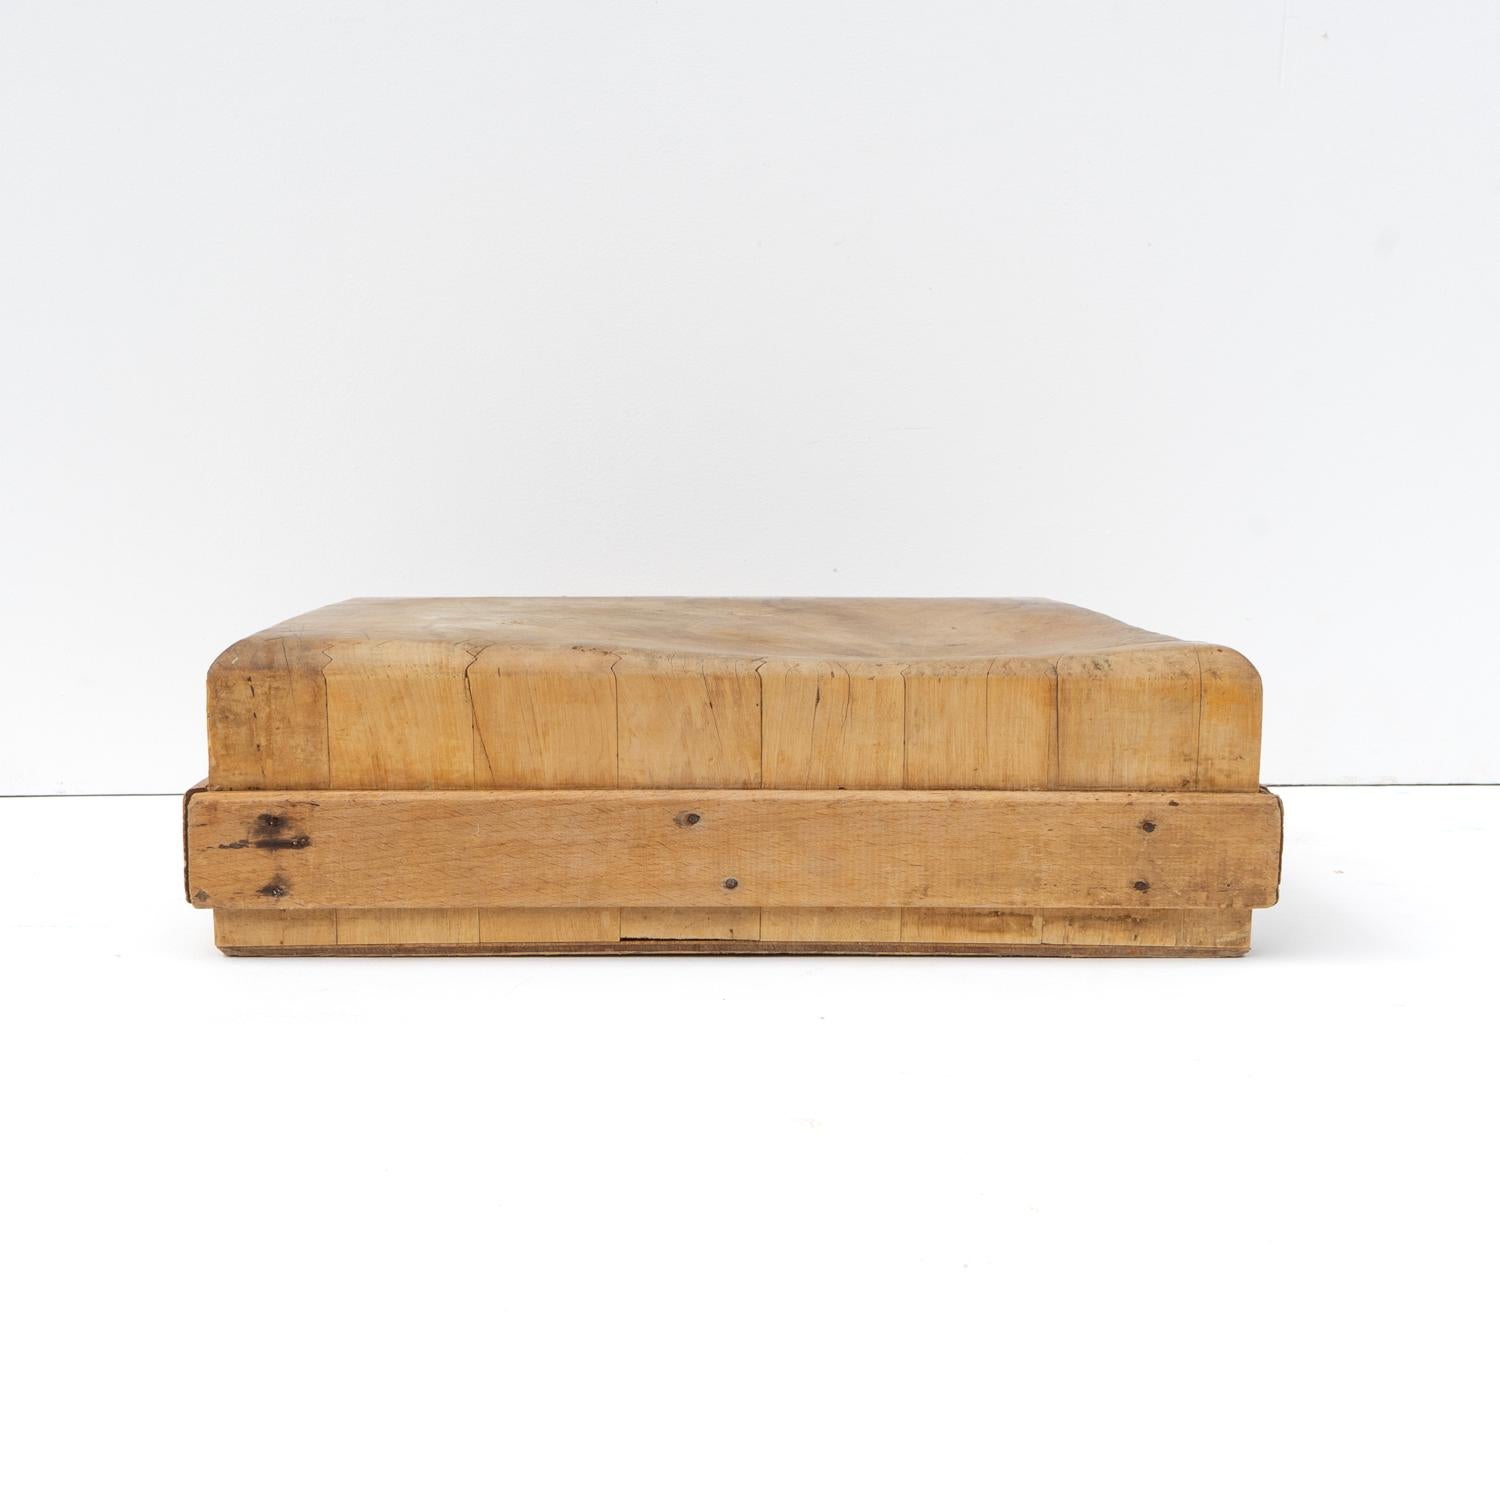 COUNTER TOP BUTCHERS BLOCK

Pieces of end grain wood block bought together in a square chunky form

Slightly undulating surface naturally worn down over time from use.

It is in good vintage condition with wear consistent with age and